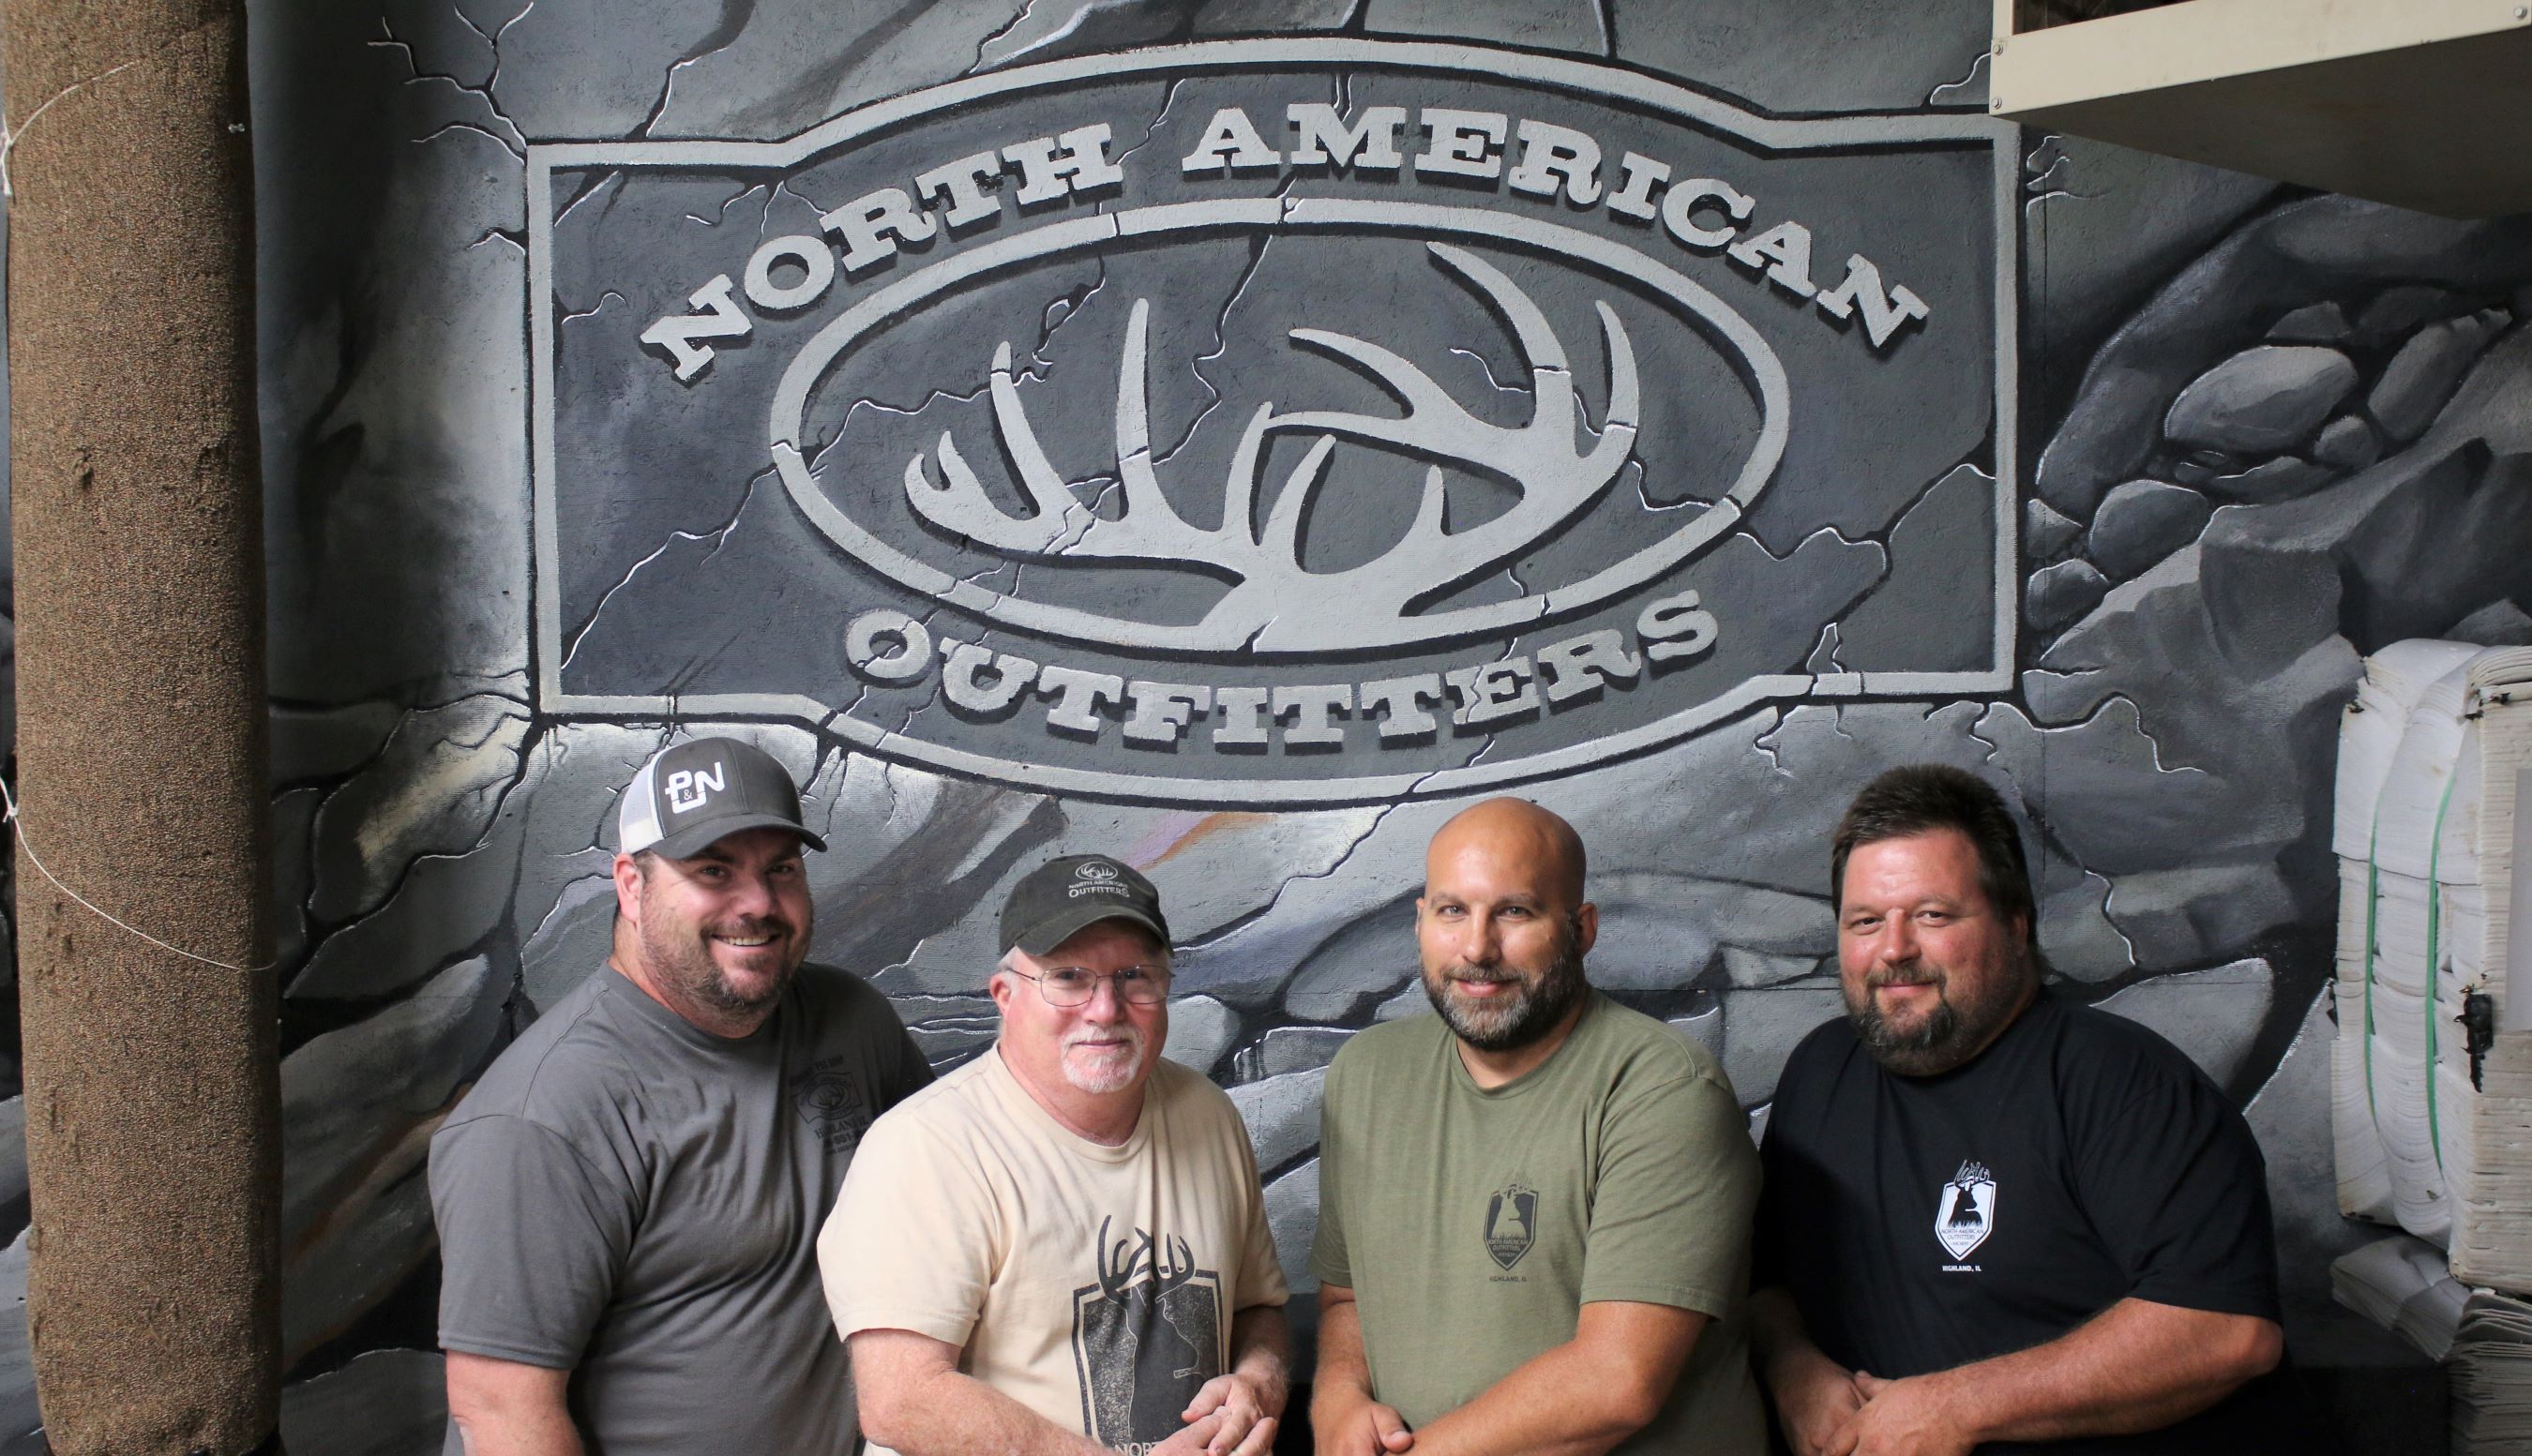 North American Outfitters is the Metro East’s Premier Archery Shop